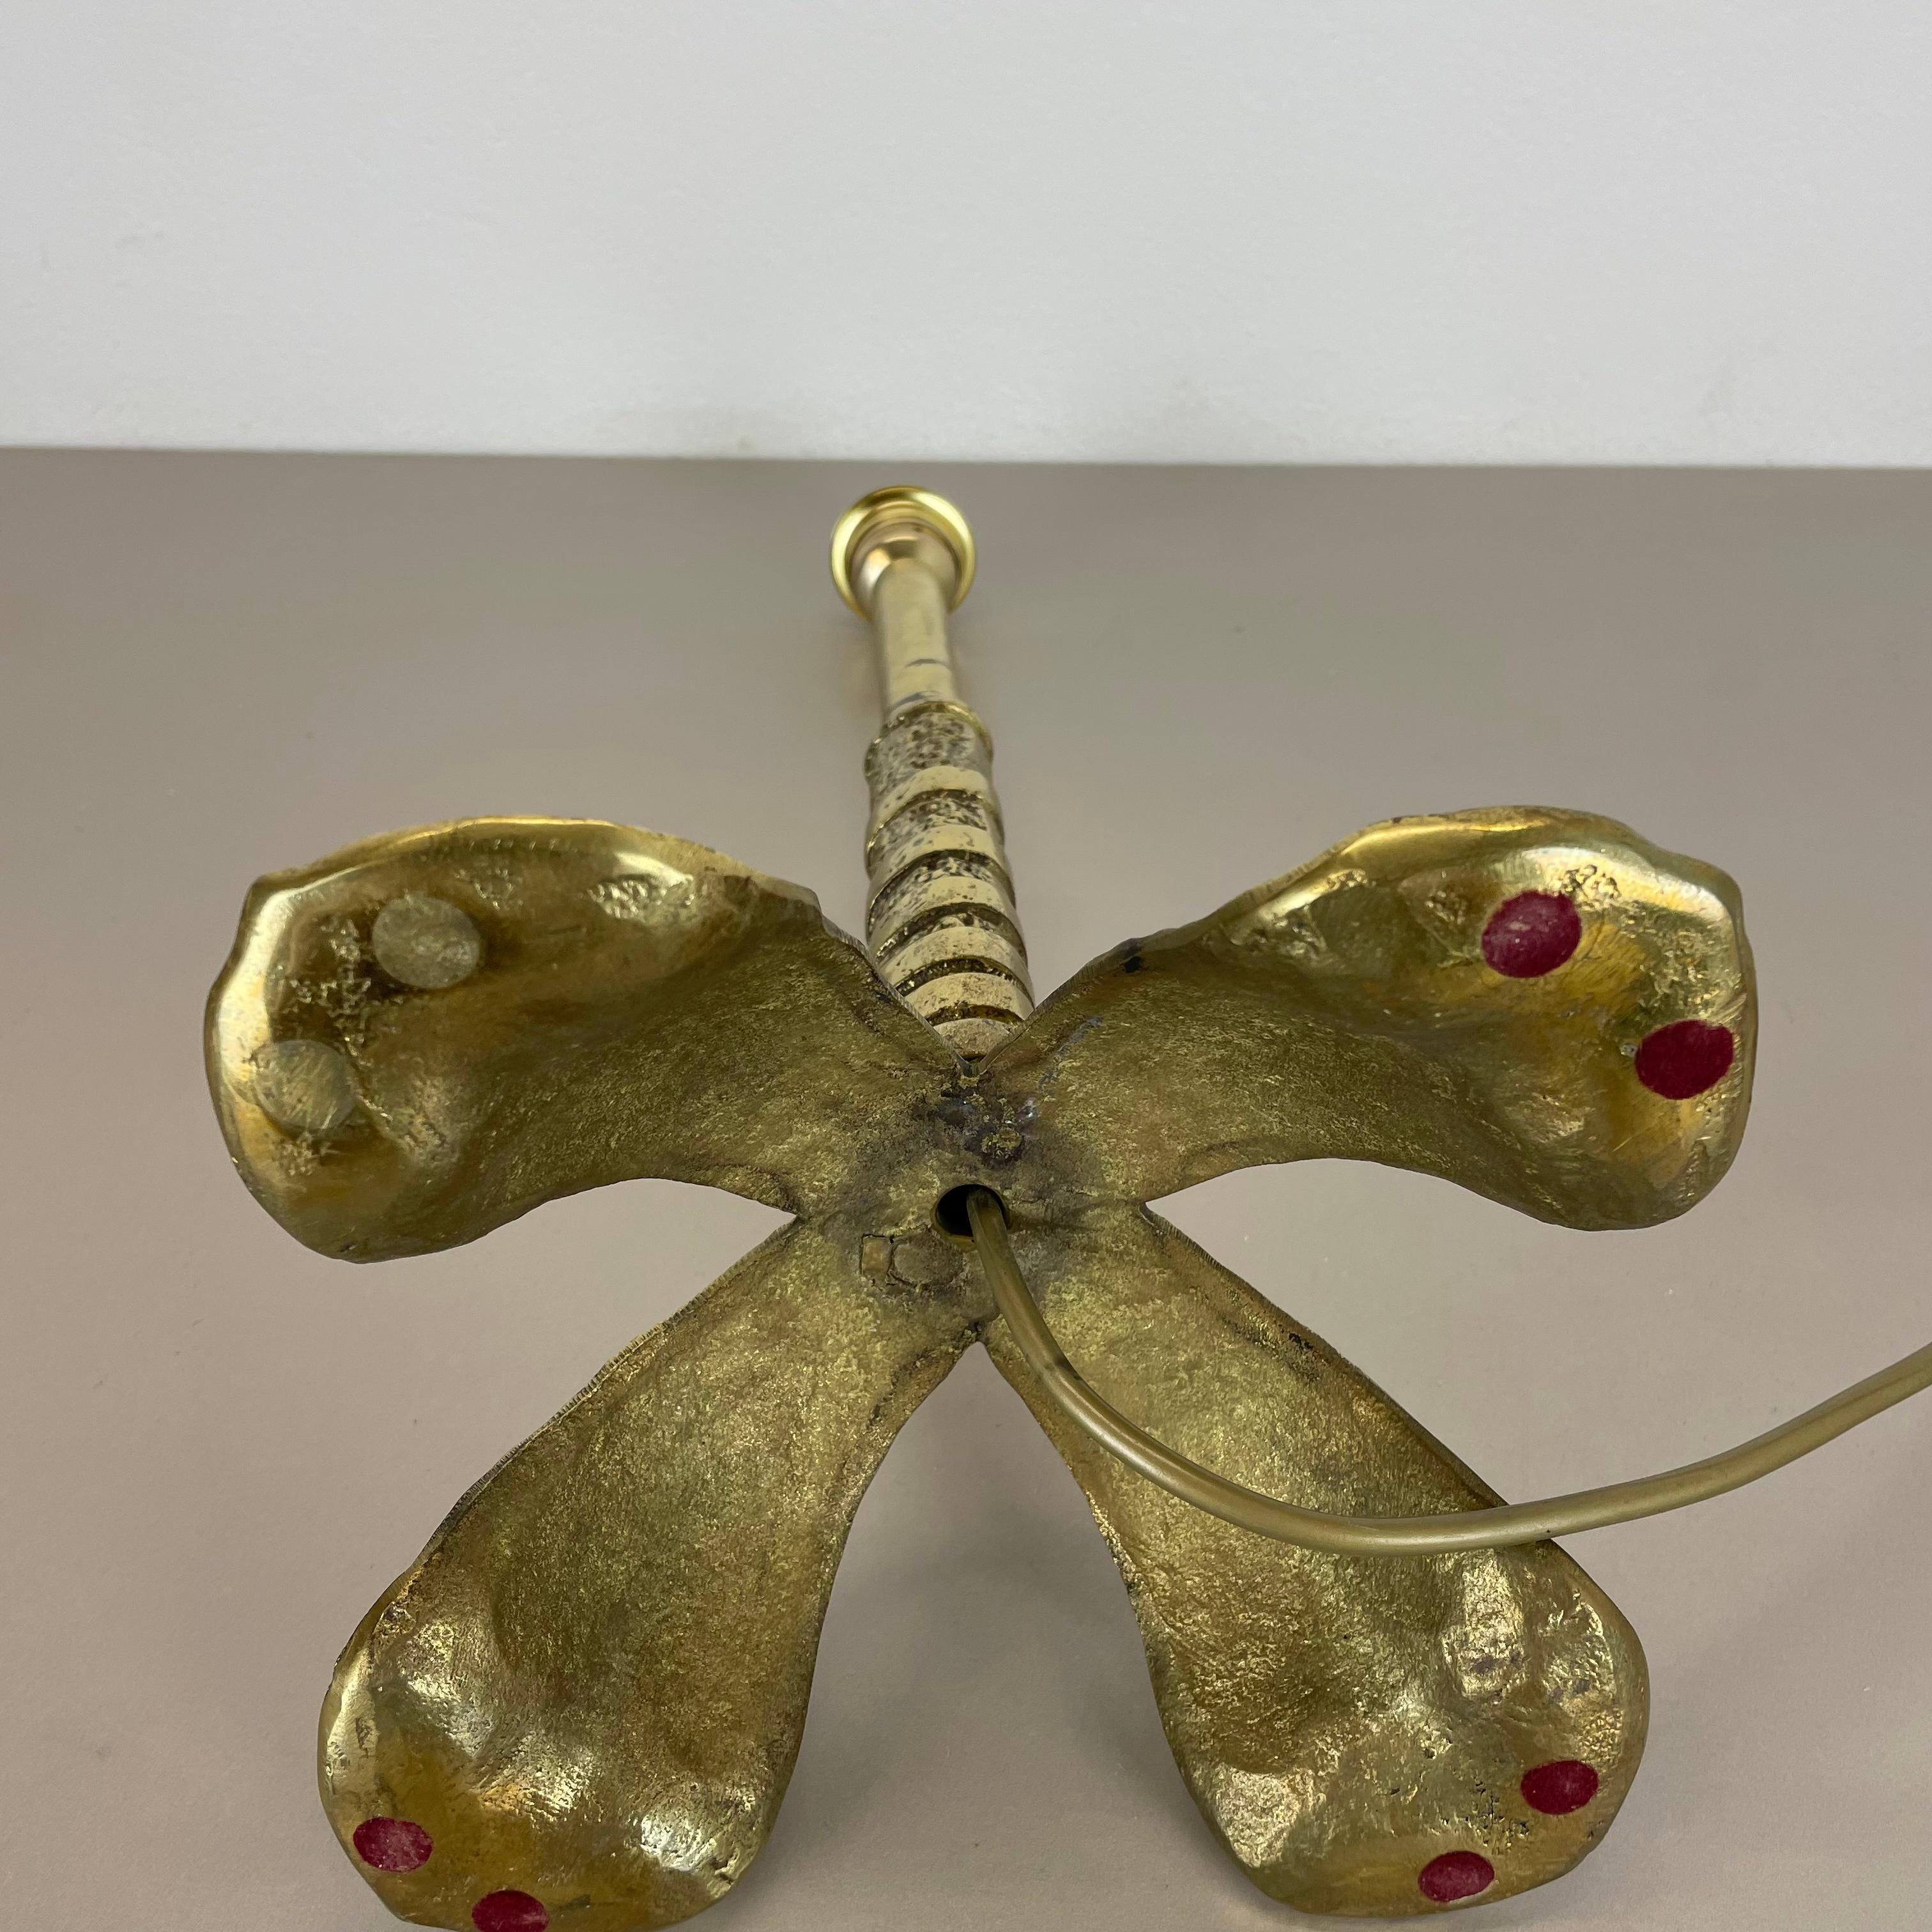 Original Hollywood Regency Style Floral Brutalist Brass Table Light, Italy 1970s For Sale 6